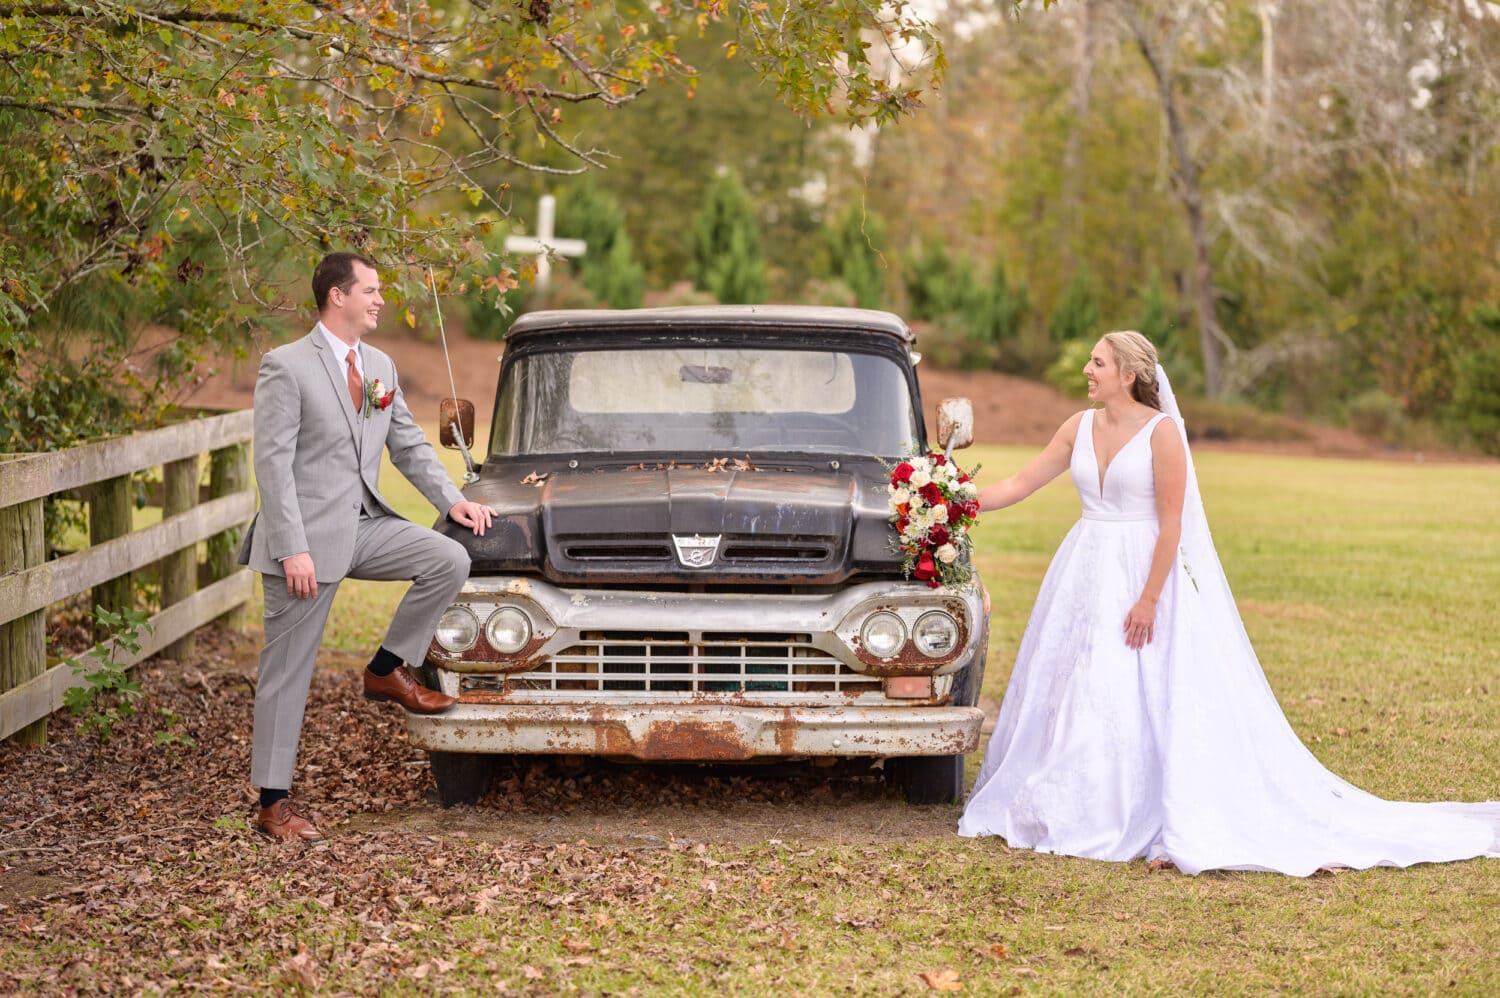 Portraits of the bride and groom around the vintage truck - The Blessed Barn